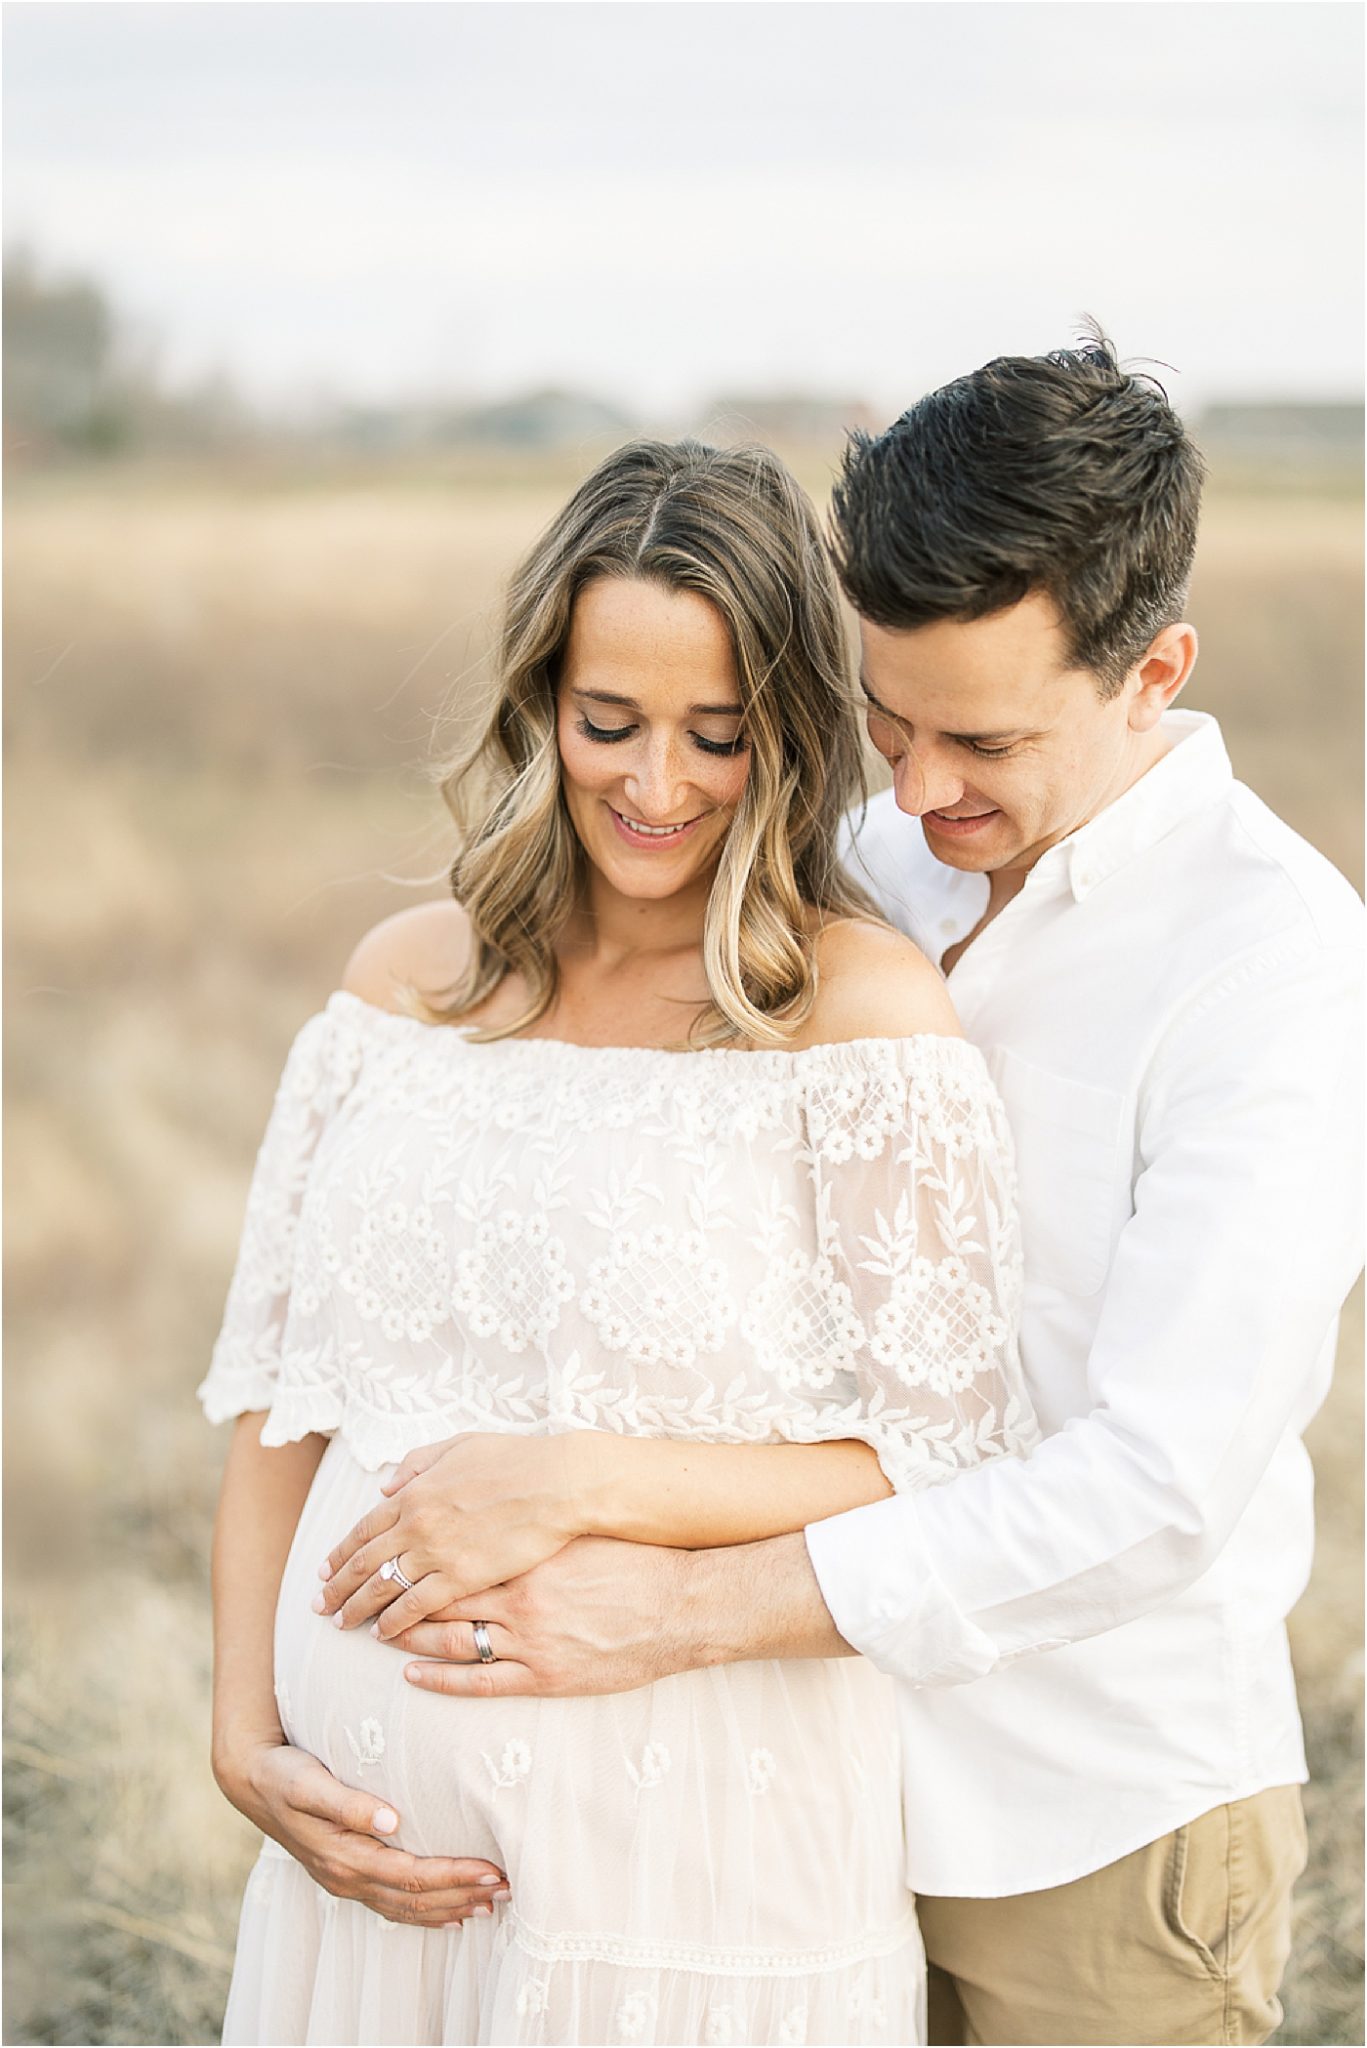 Outdoor maternity session in Broad Ripple Indiana. Photo by Lindsay Konopa Photography.